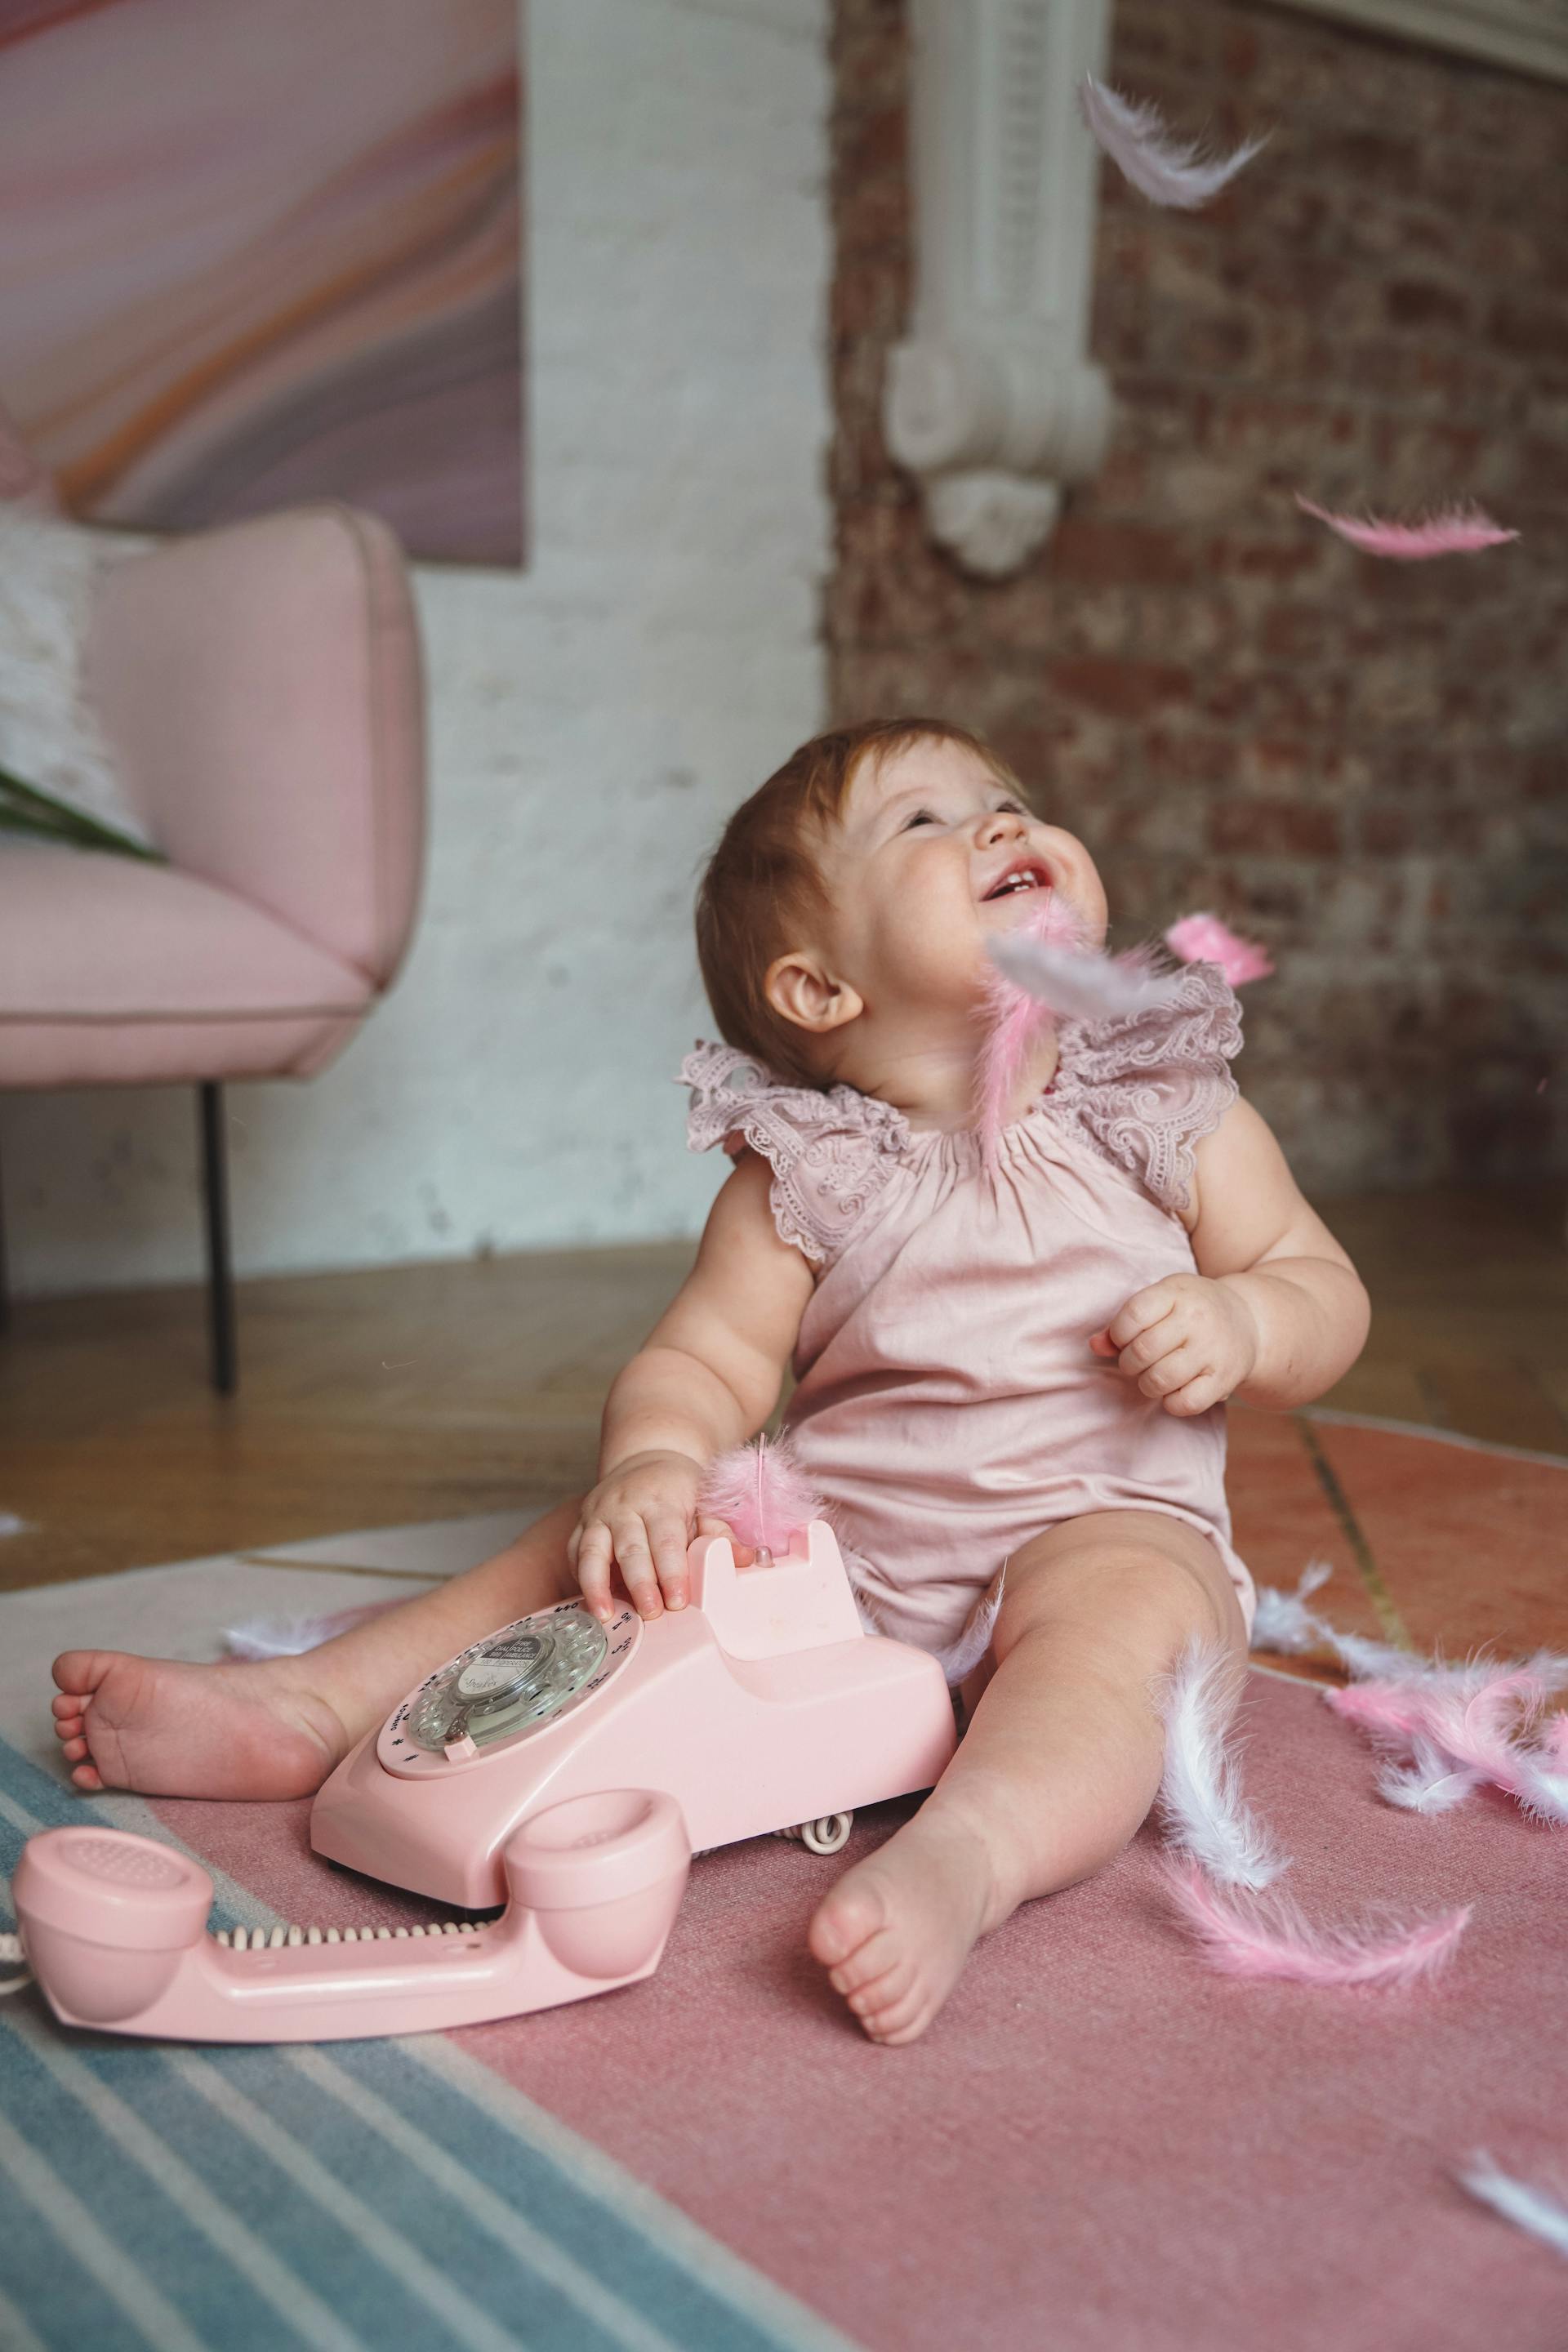 A baby girl dressed in pink clothing playing with feathers and a pink telephone